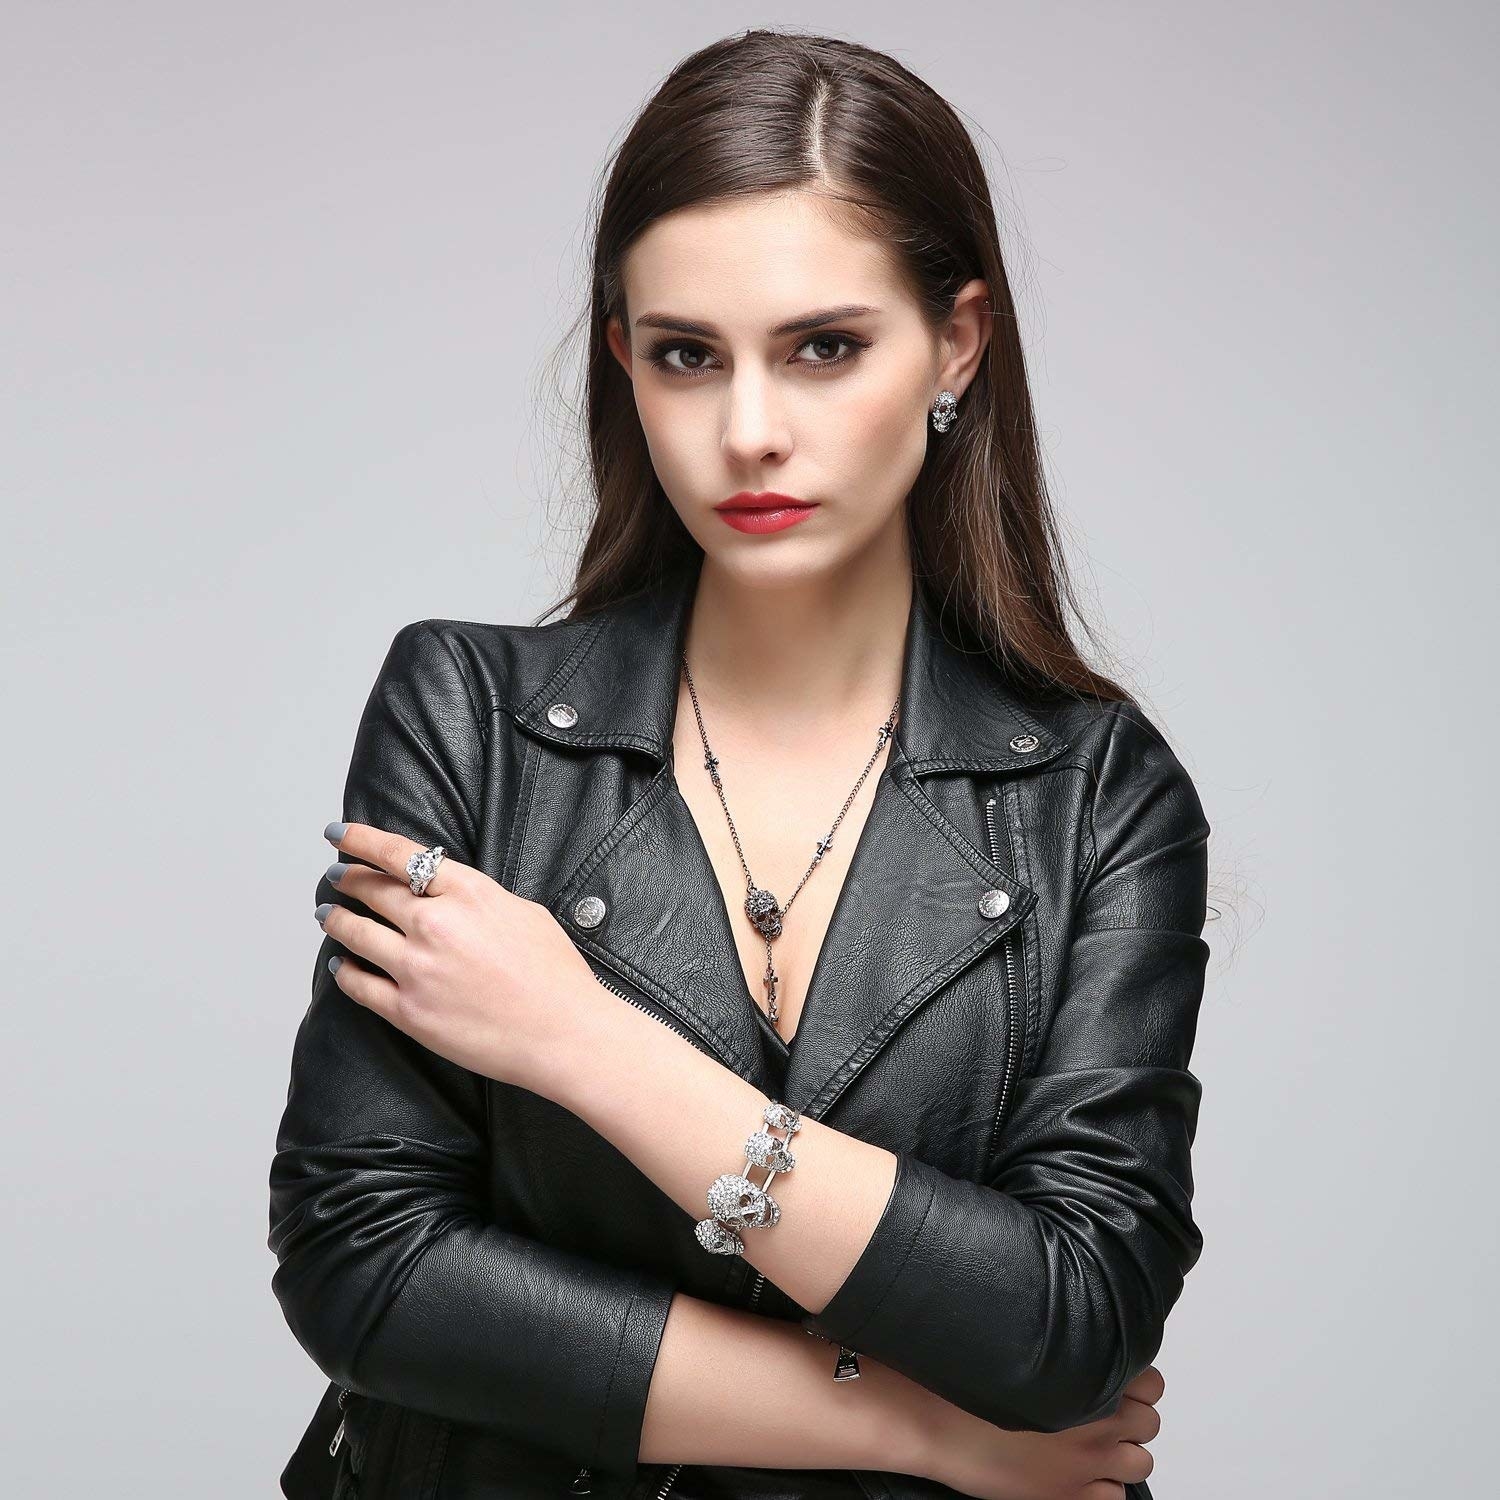 model wearing the skull necklace with a leather jacket